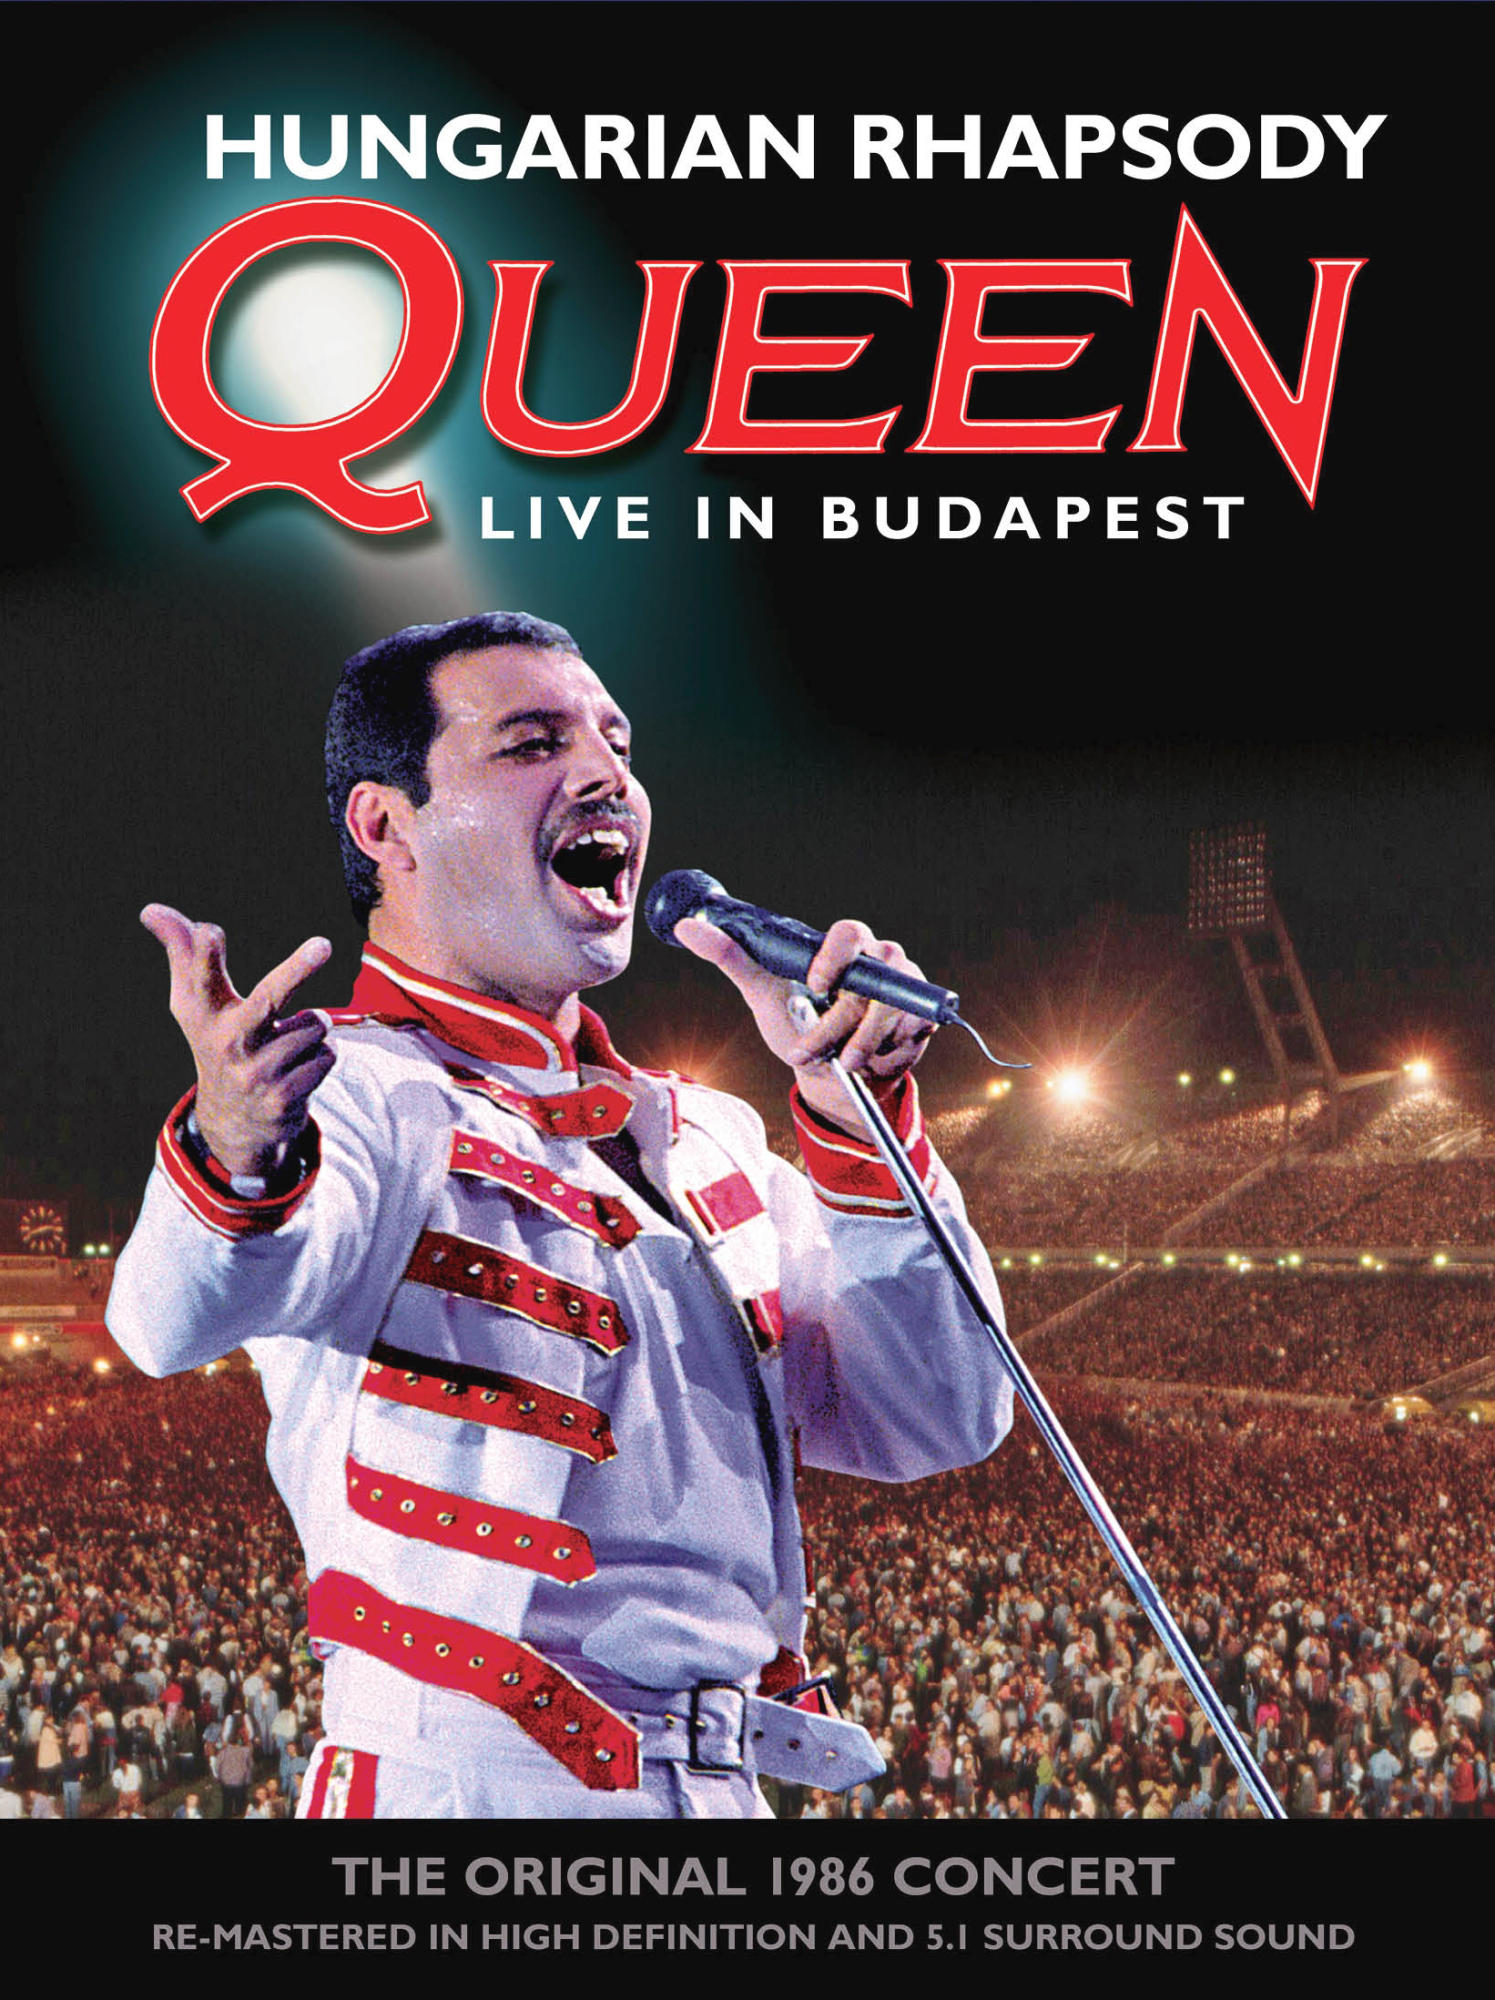 Queen - HUNGARIAN RHAPSODY - IN (DVD) LIVE BUDAPEST 